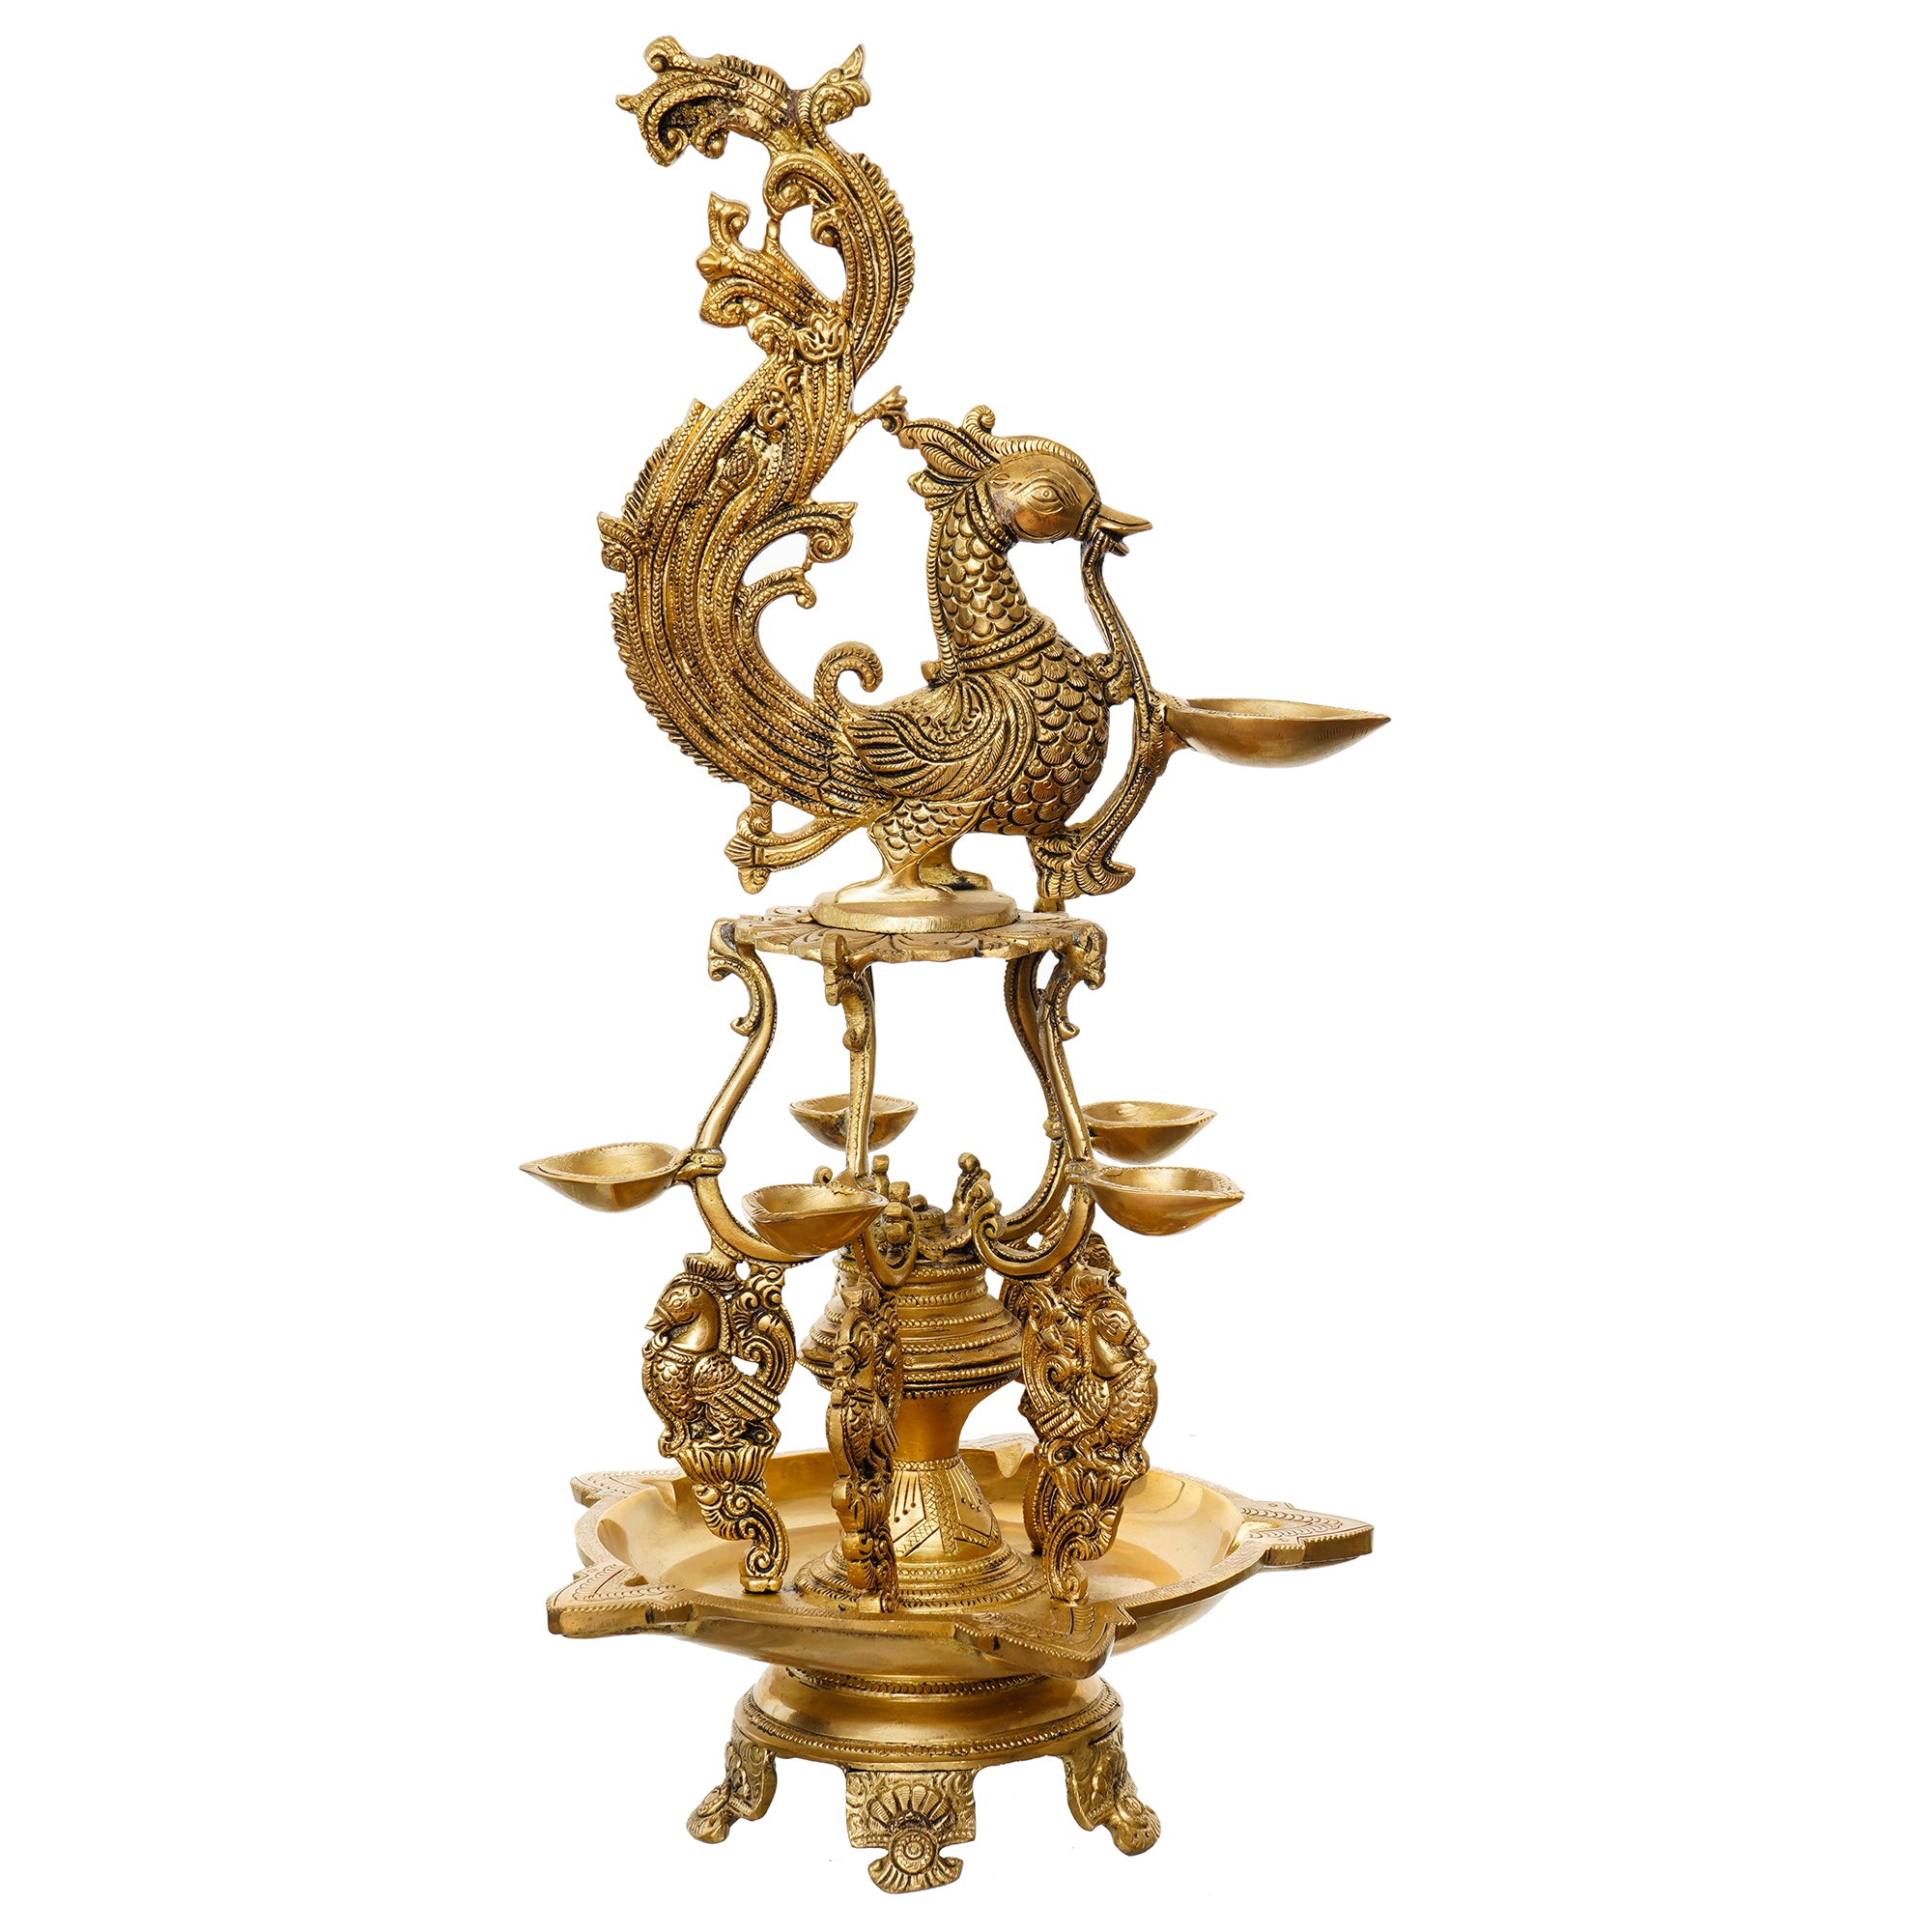 Golden Antique Finish Decorative Handcrafted Brass Peacock Showpiece with Brass Diyas for 11 Wicks and Stand 4